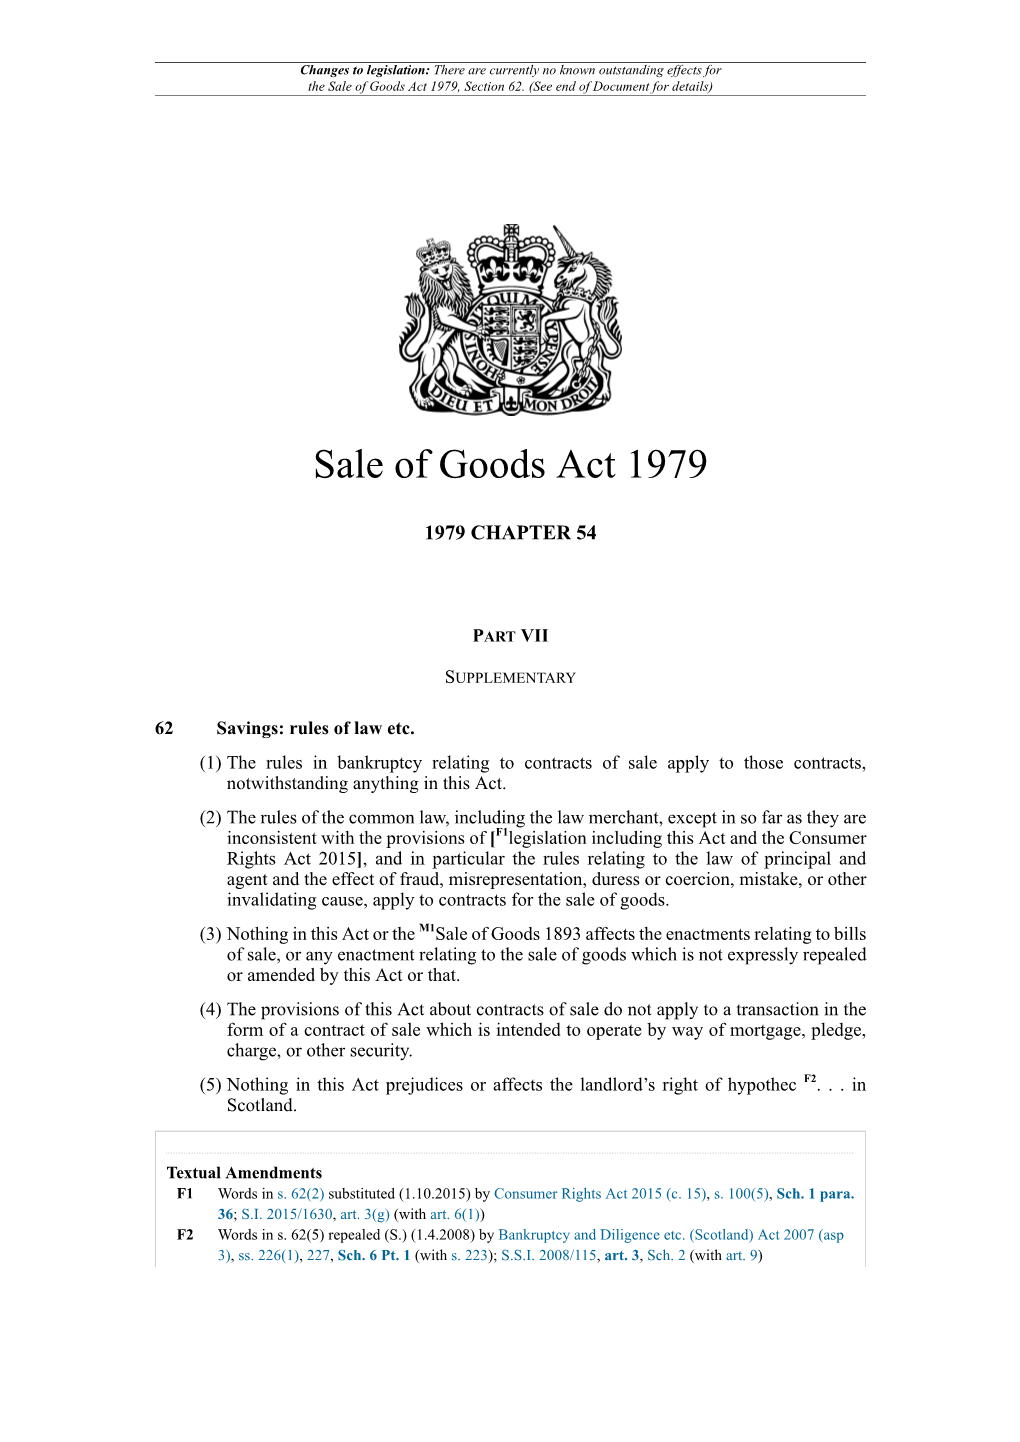 Sale of Goods Act 1979, Section 62